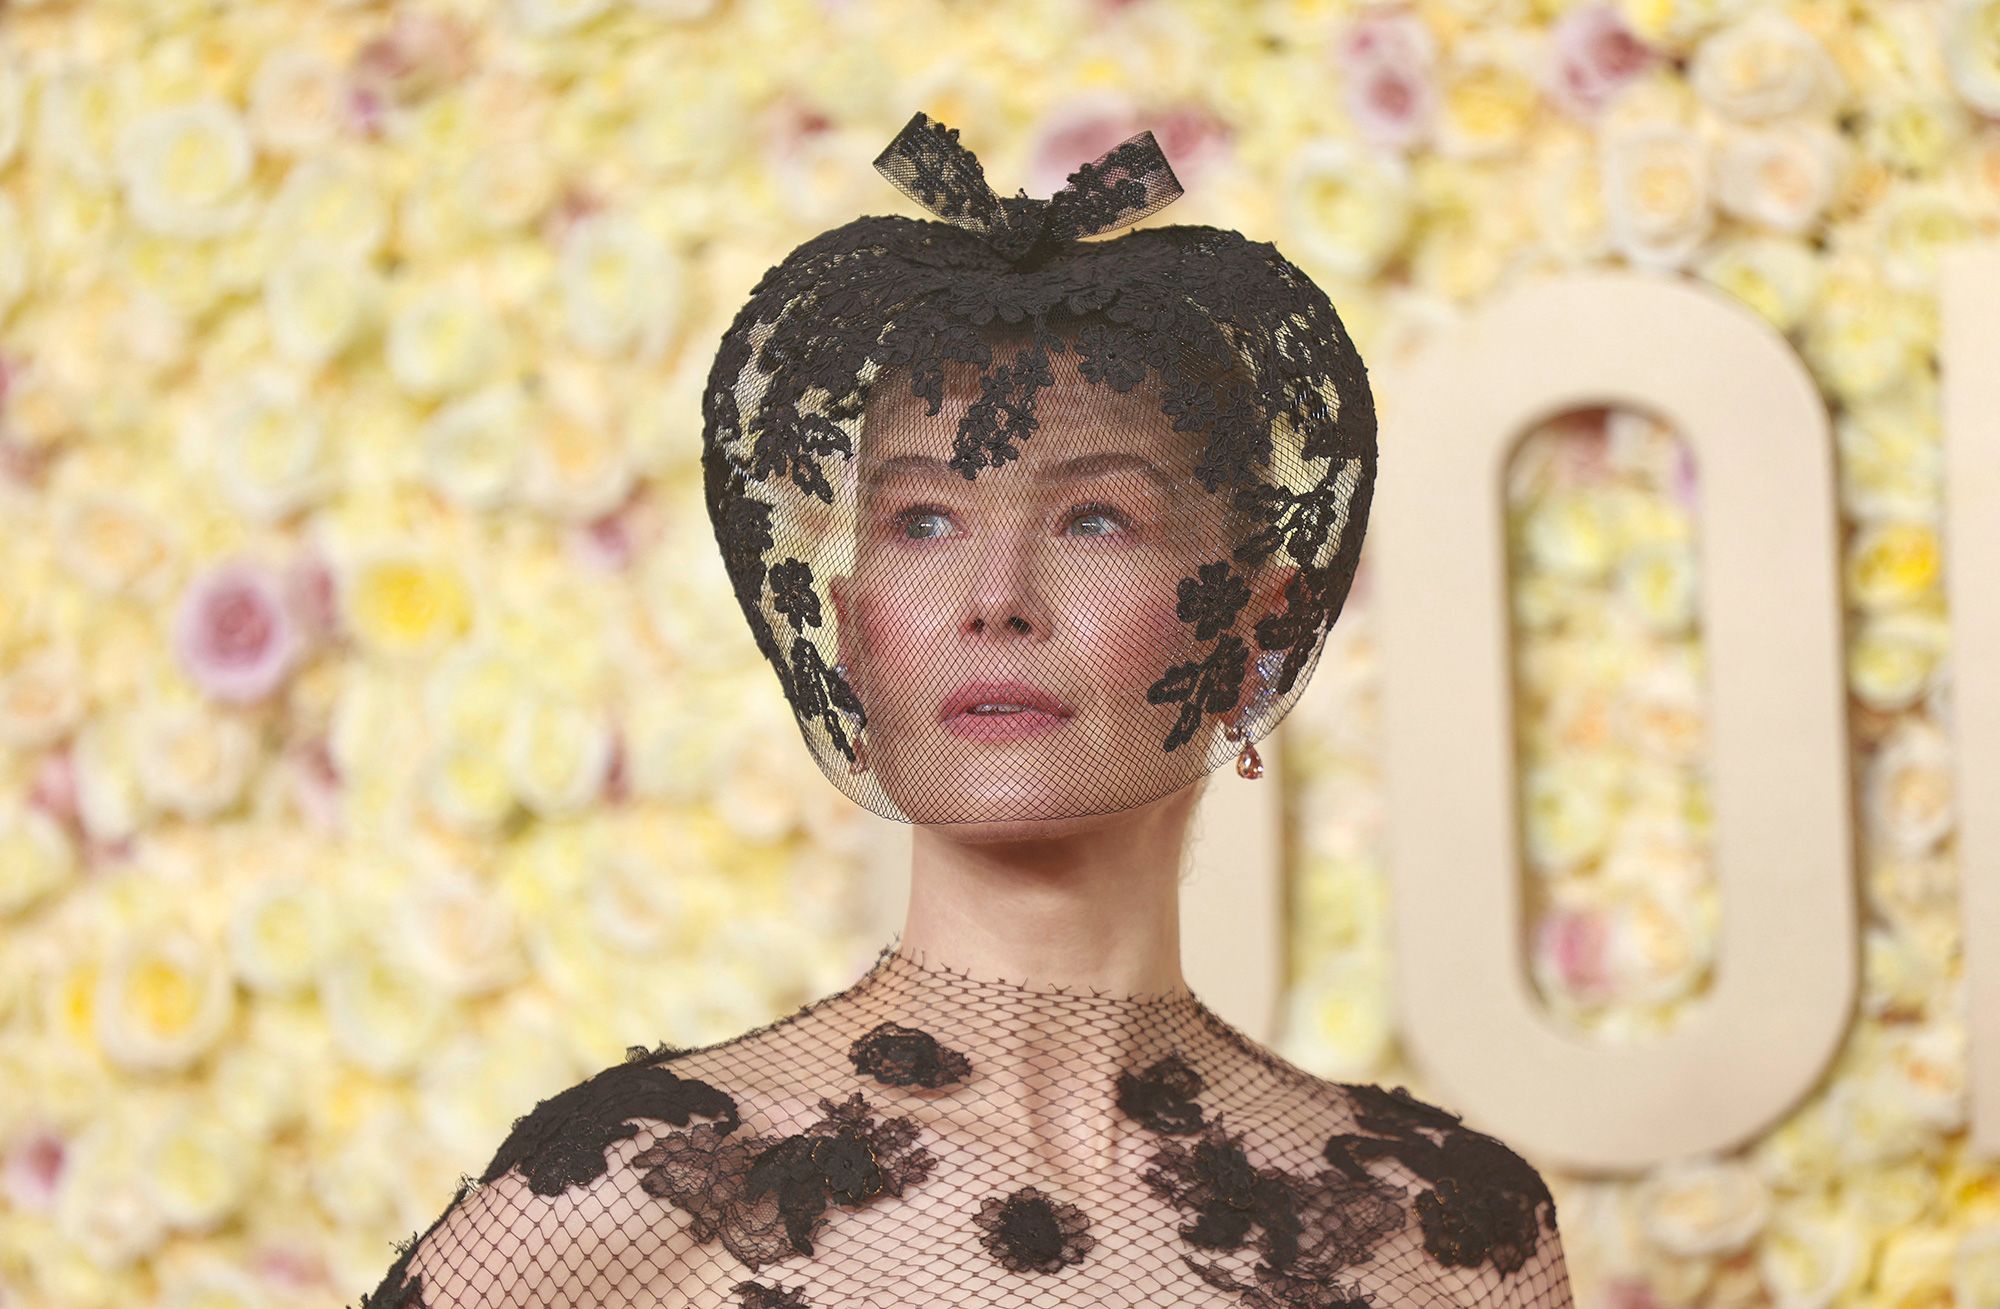 'Saltburn” actress Rosamund Pike’s decision to match her lacy black Fall 2019 Dior couture dress with a veiled fascinator by Philip Treacy came about following a recent skiing accident. 'My face was entirely smashed up and I thought, 'I need to do something',” she told the red carpet pre-show presenter Marc Malkin. “Actually, it's healed, but I fell in love with the look.”